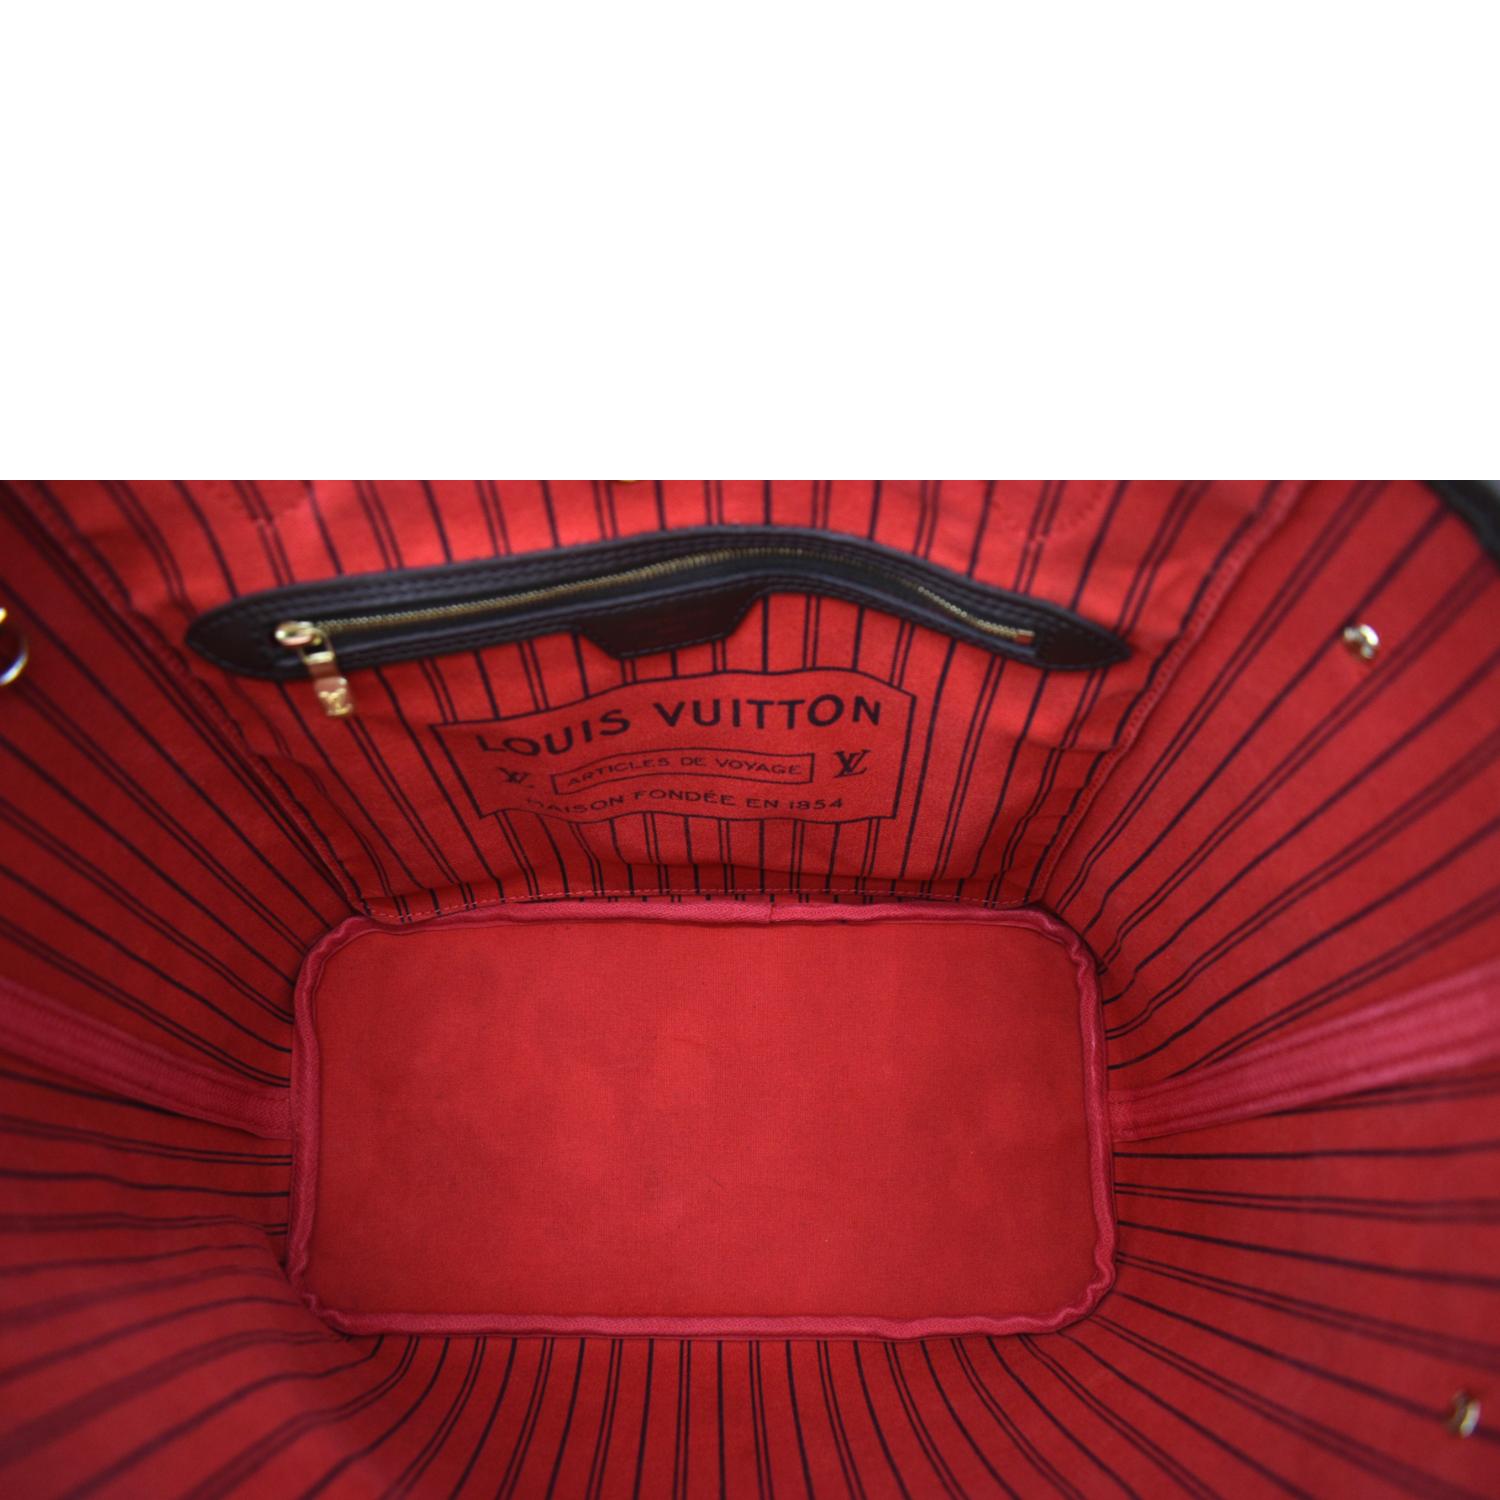 LOUIS VUITTON Neverfull MM Rubens Masters Collection Shoulder Tote Bag  M43317｜Product Code：2106800337853｜BRAND OFF Online Store